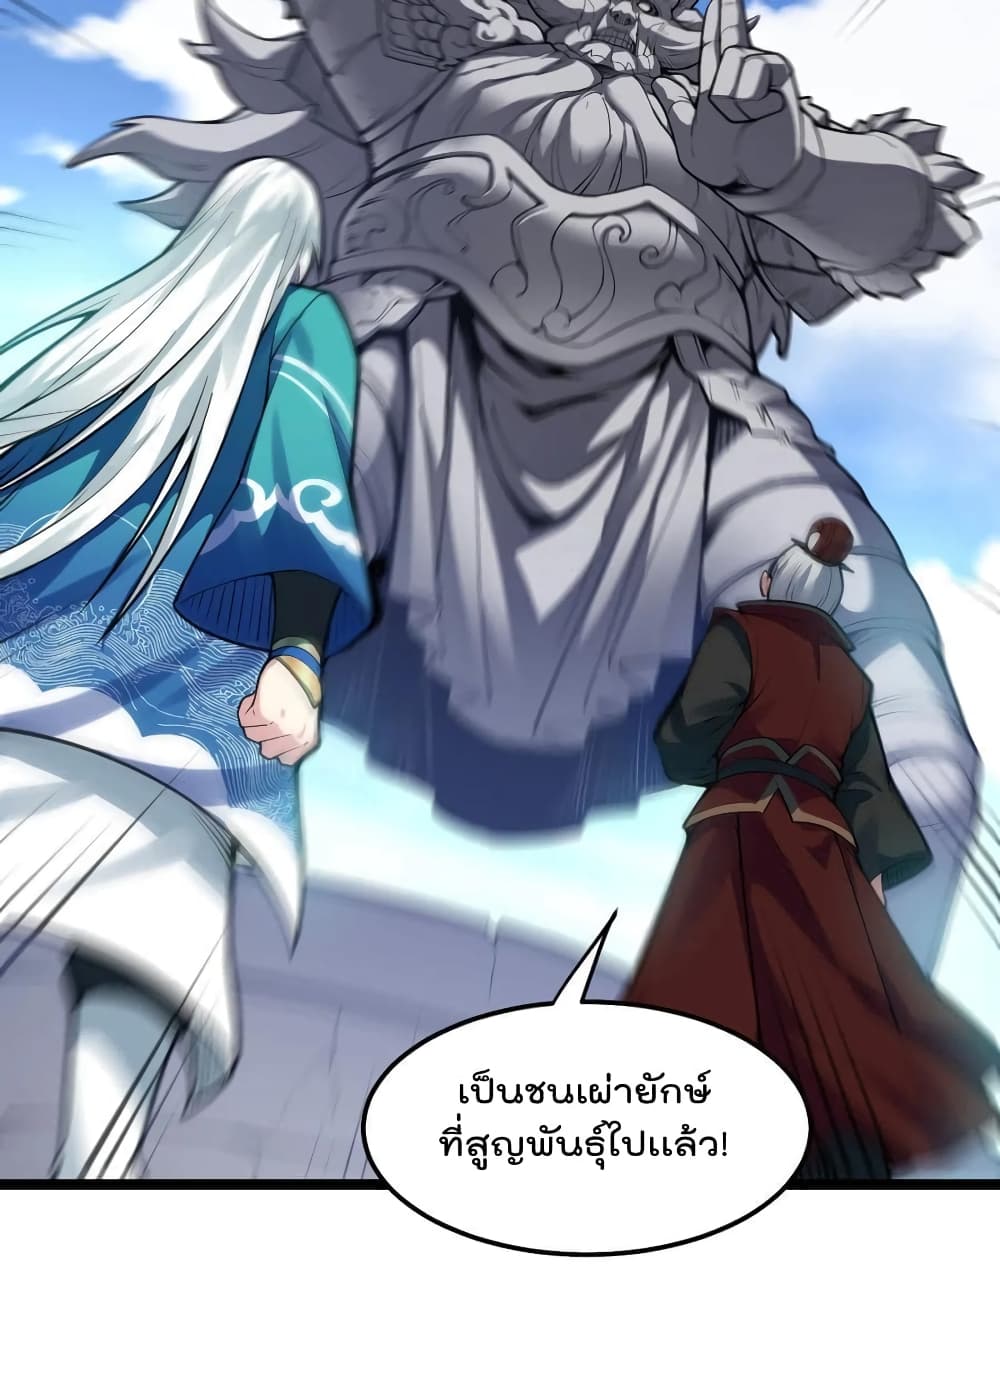 Godsian Masian from Another World ตอนที่ 100 (11)